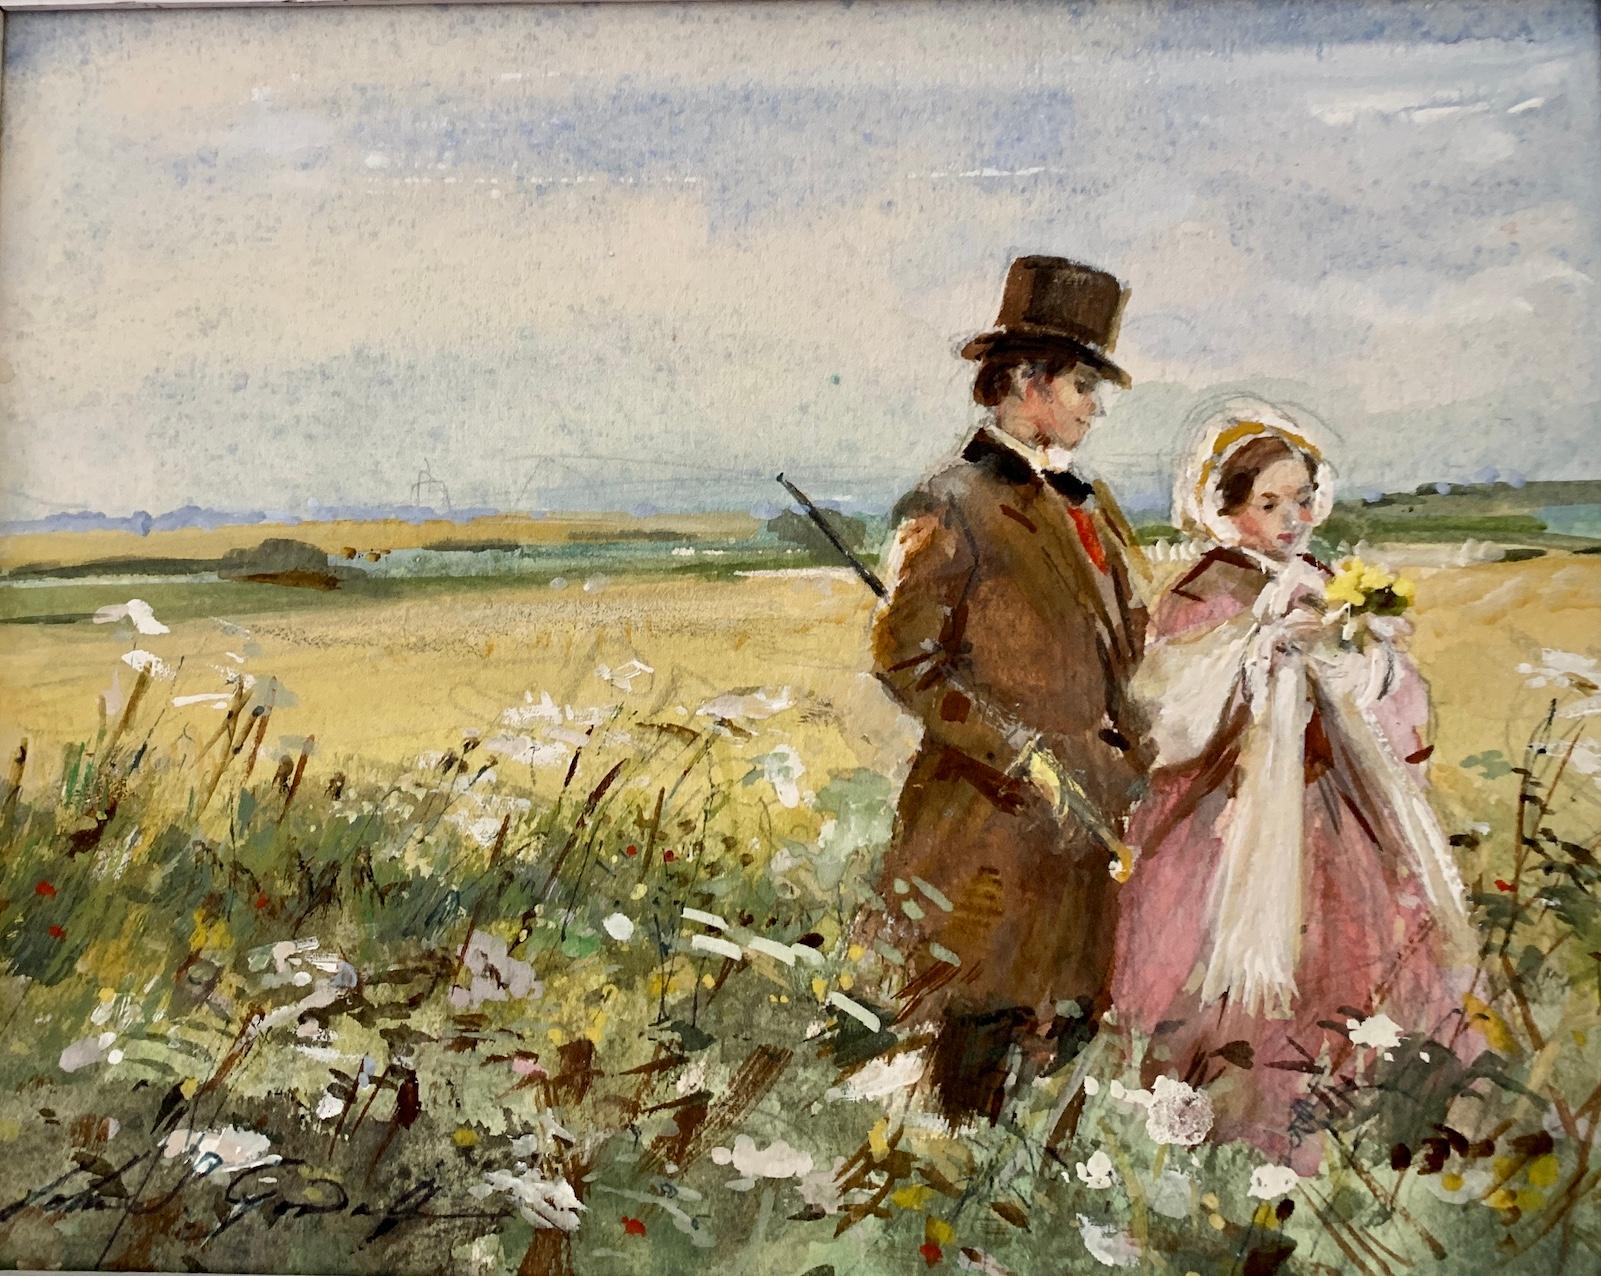 Courtship,  British Couple walking in a landscape in Edwardian dress - Art by John Strickland Goodall